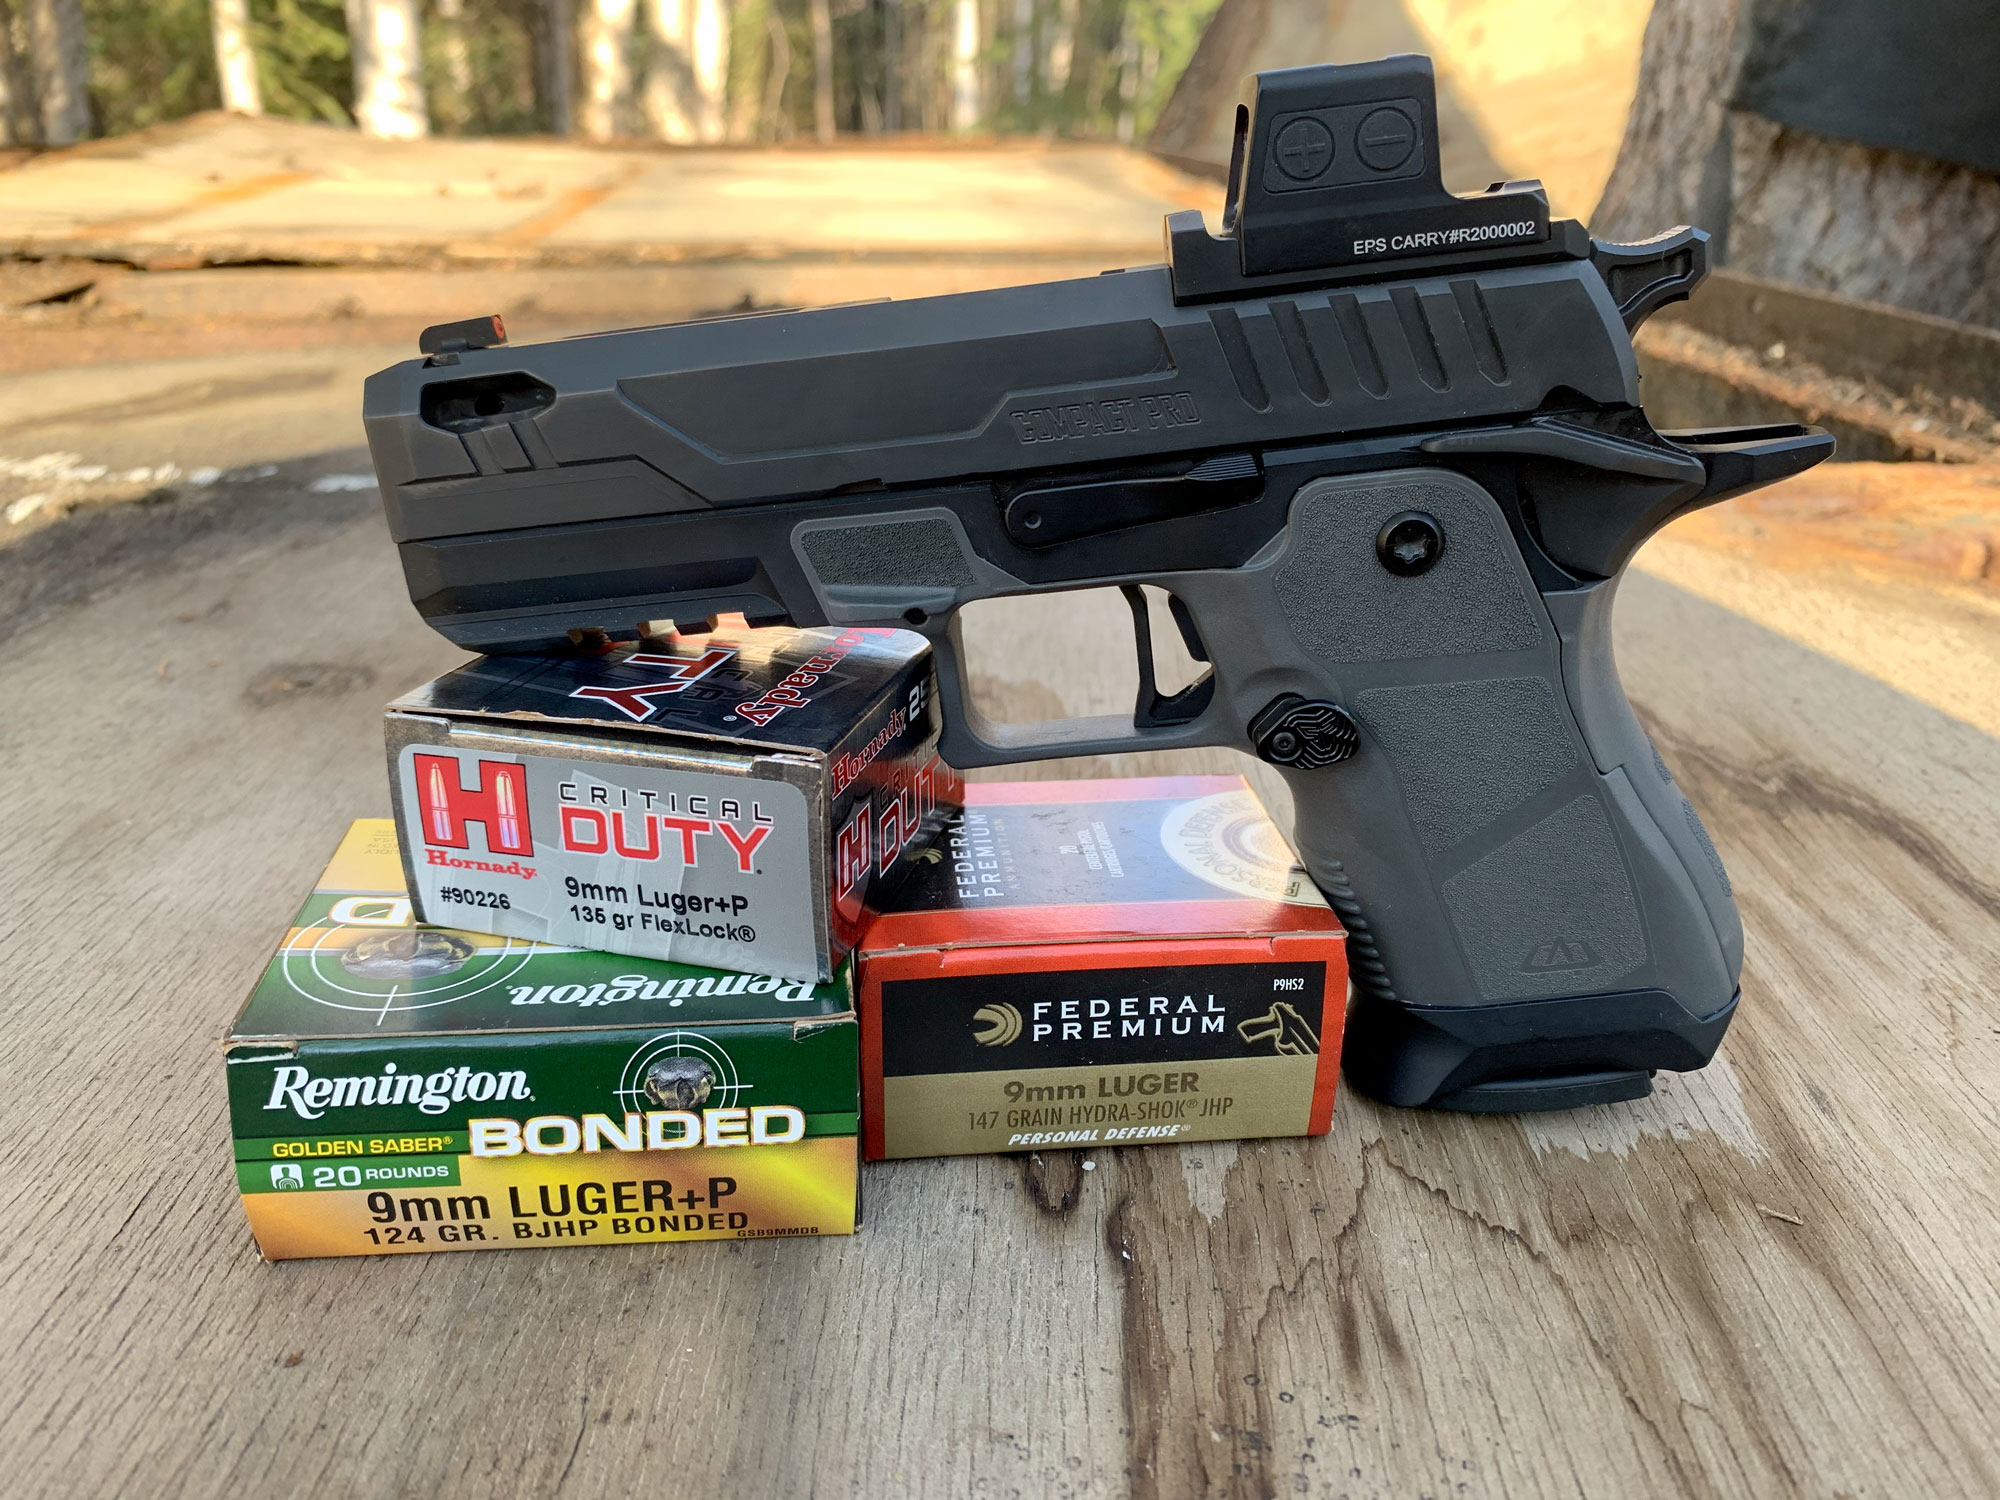 Oracle Arms 2311 Compact Pro and ammo